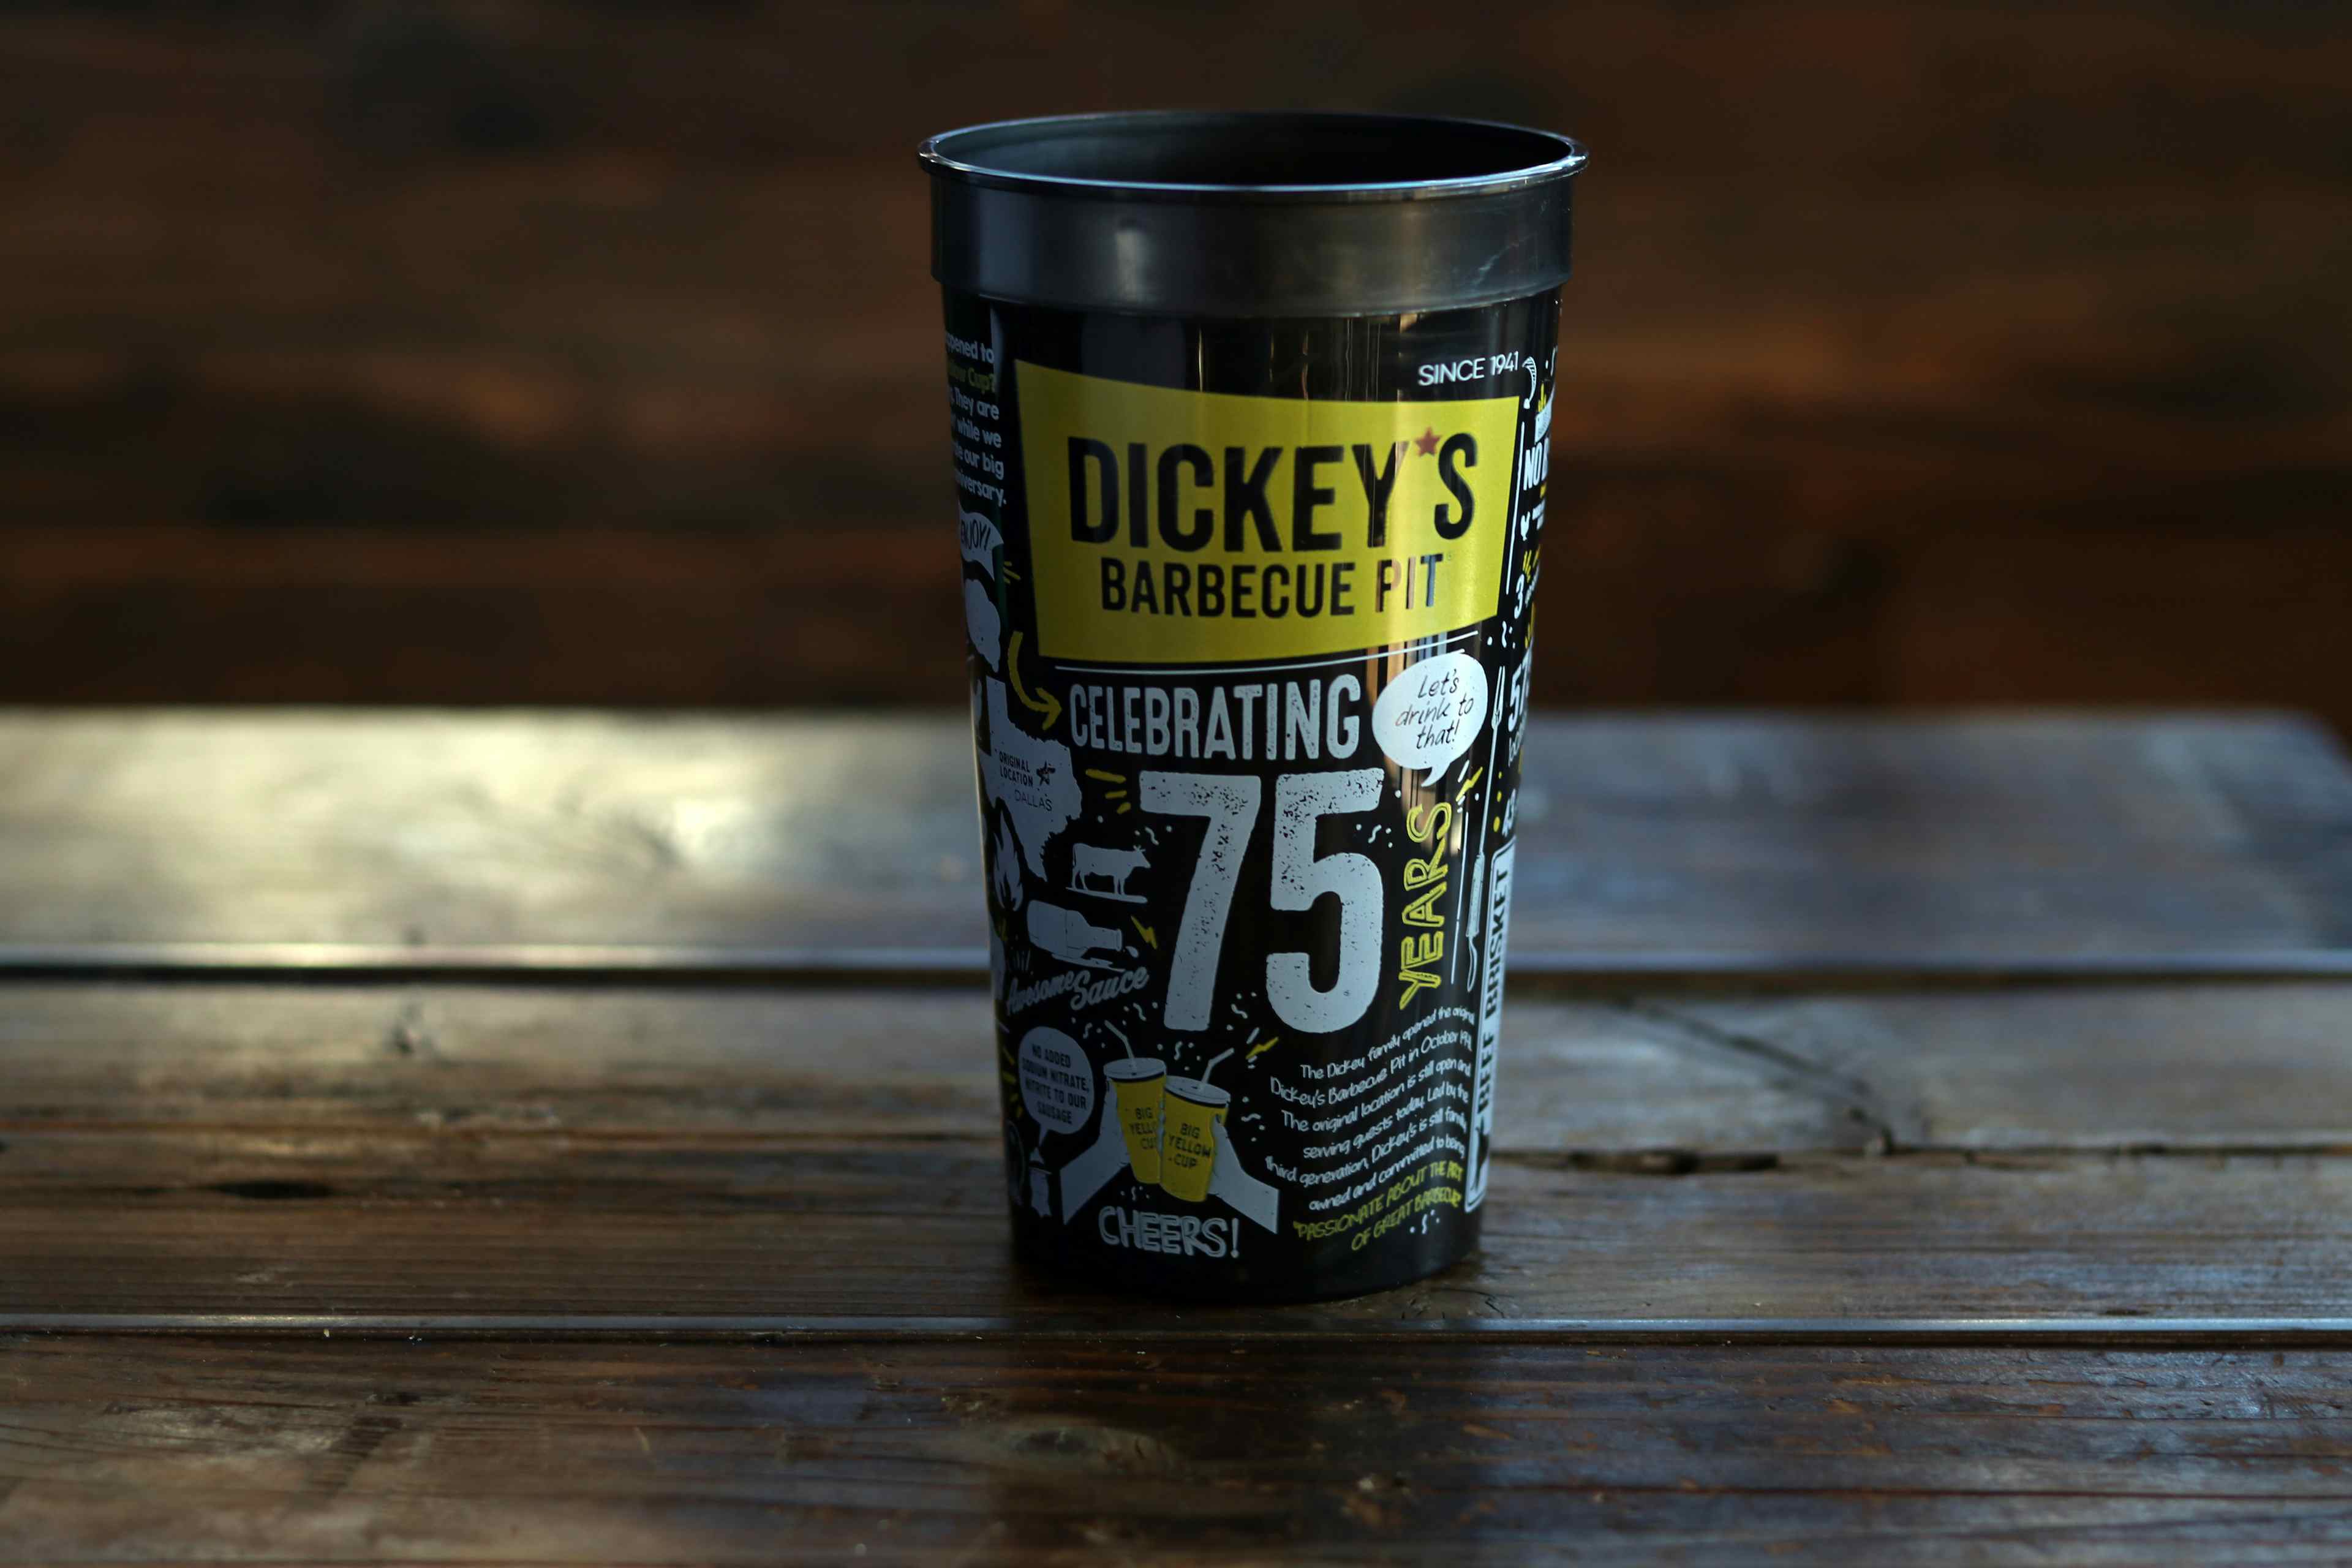 WFAA Good Morning Texas: Dickey's Barbecue Pit Celebrates 75 Delicious Years